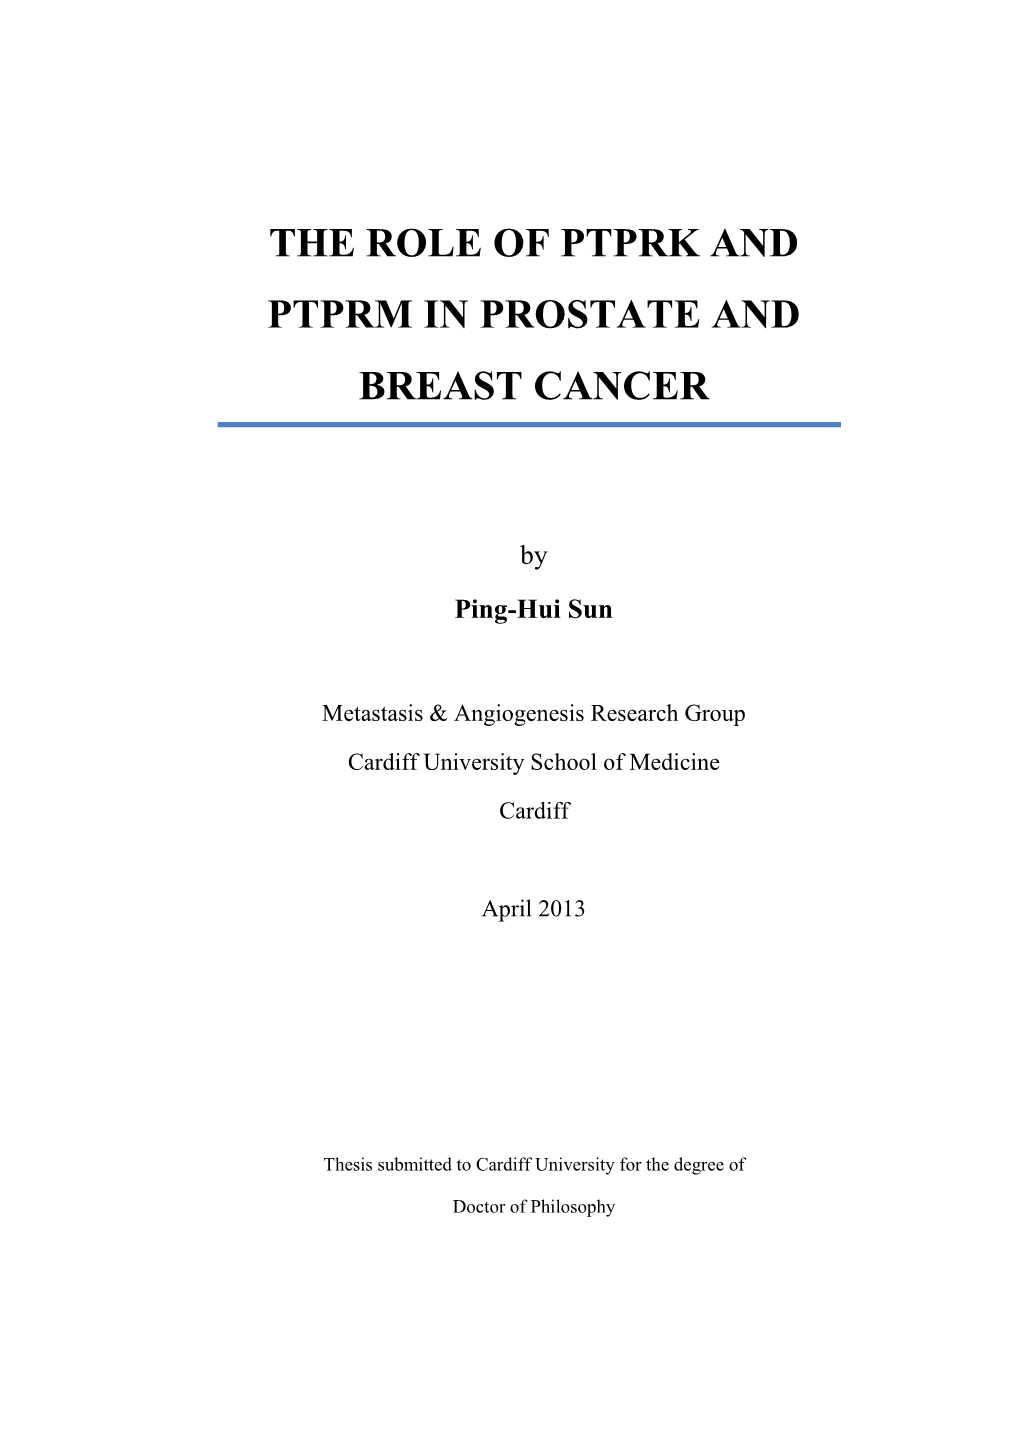 The Role of Ptprk and Ptprm in Prostate and Breast Cancer